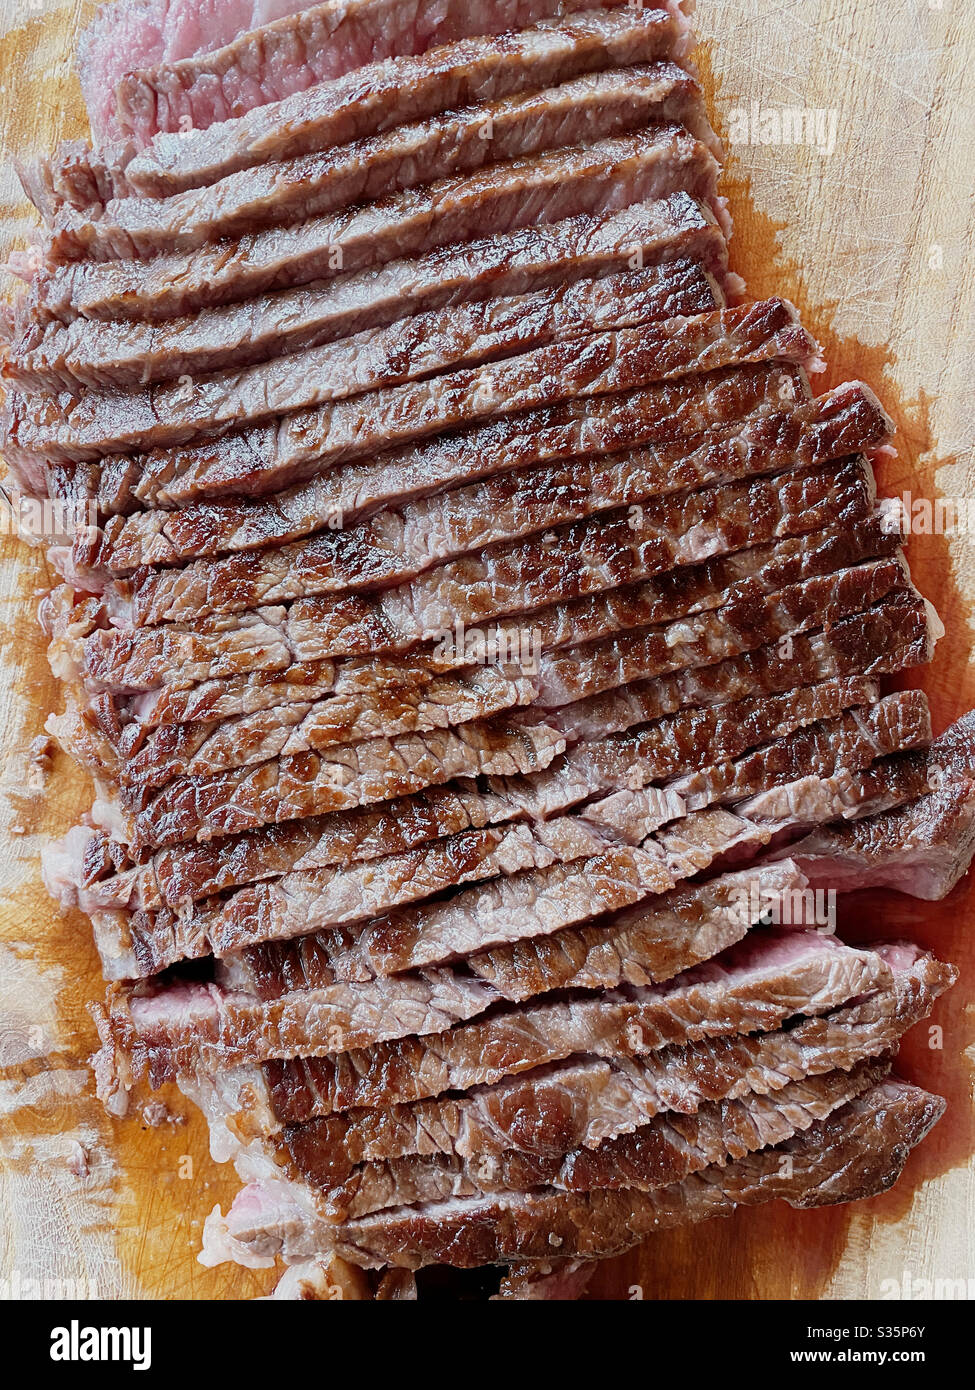 Overhead view of a shoulder steak, sliced and resting on a carving board. Stock Photo